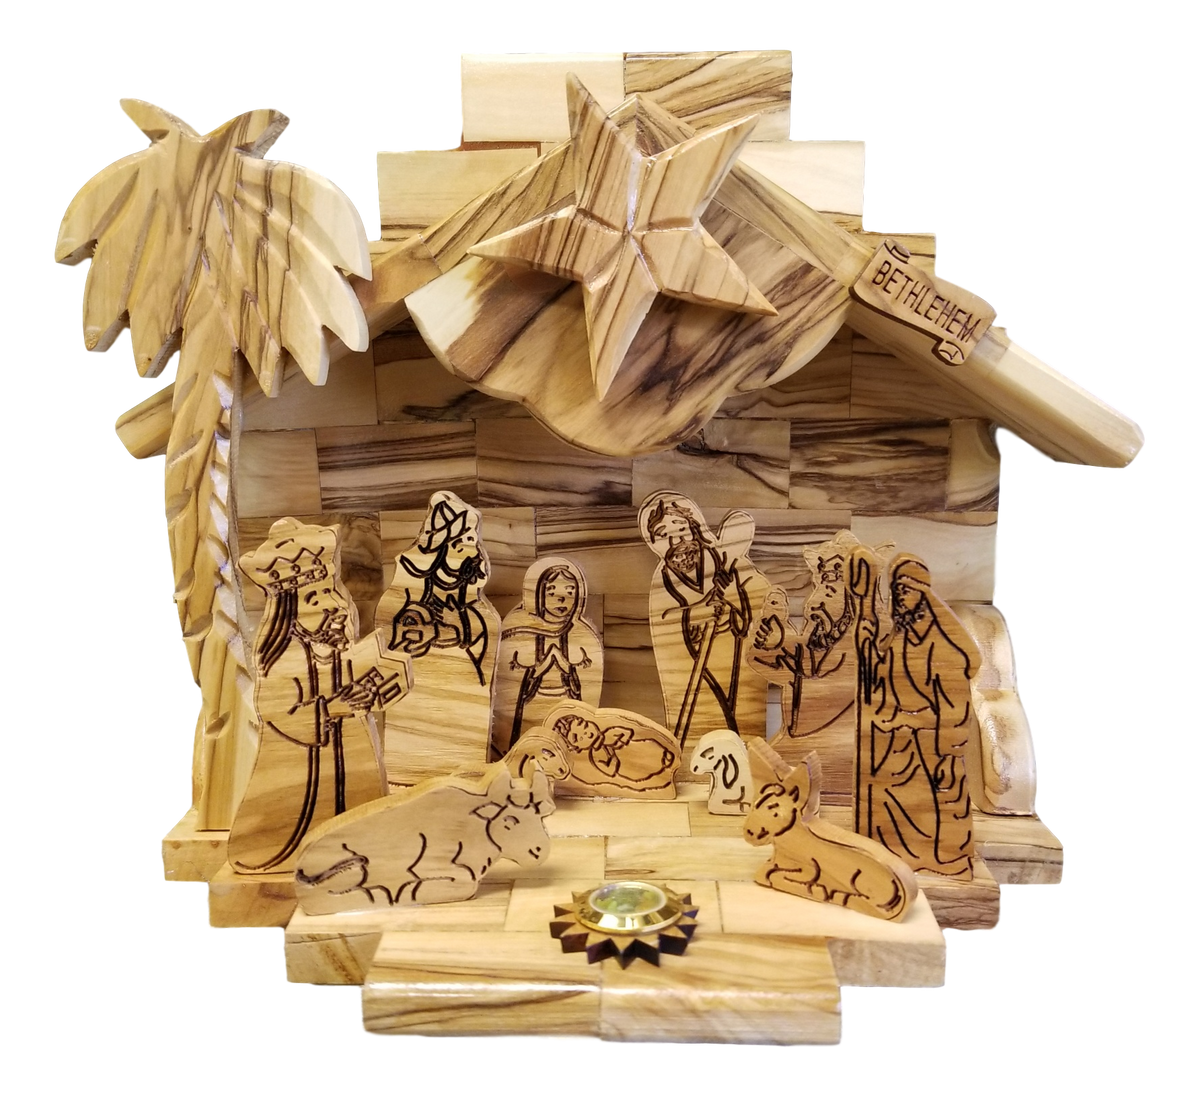 Nativity set, Musical, With incense from the tomb of Jesus, Available in different sizes